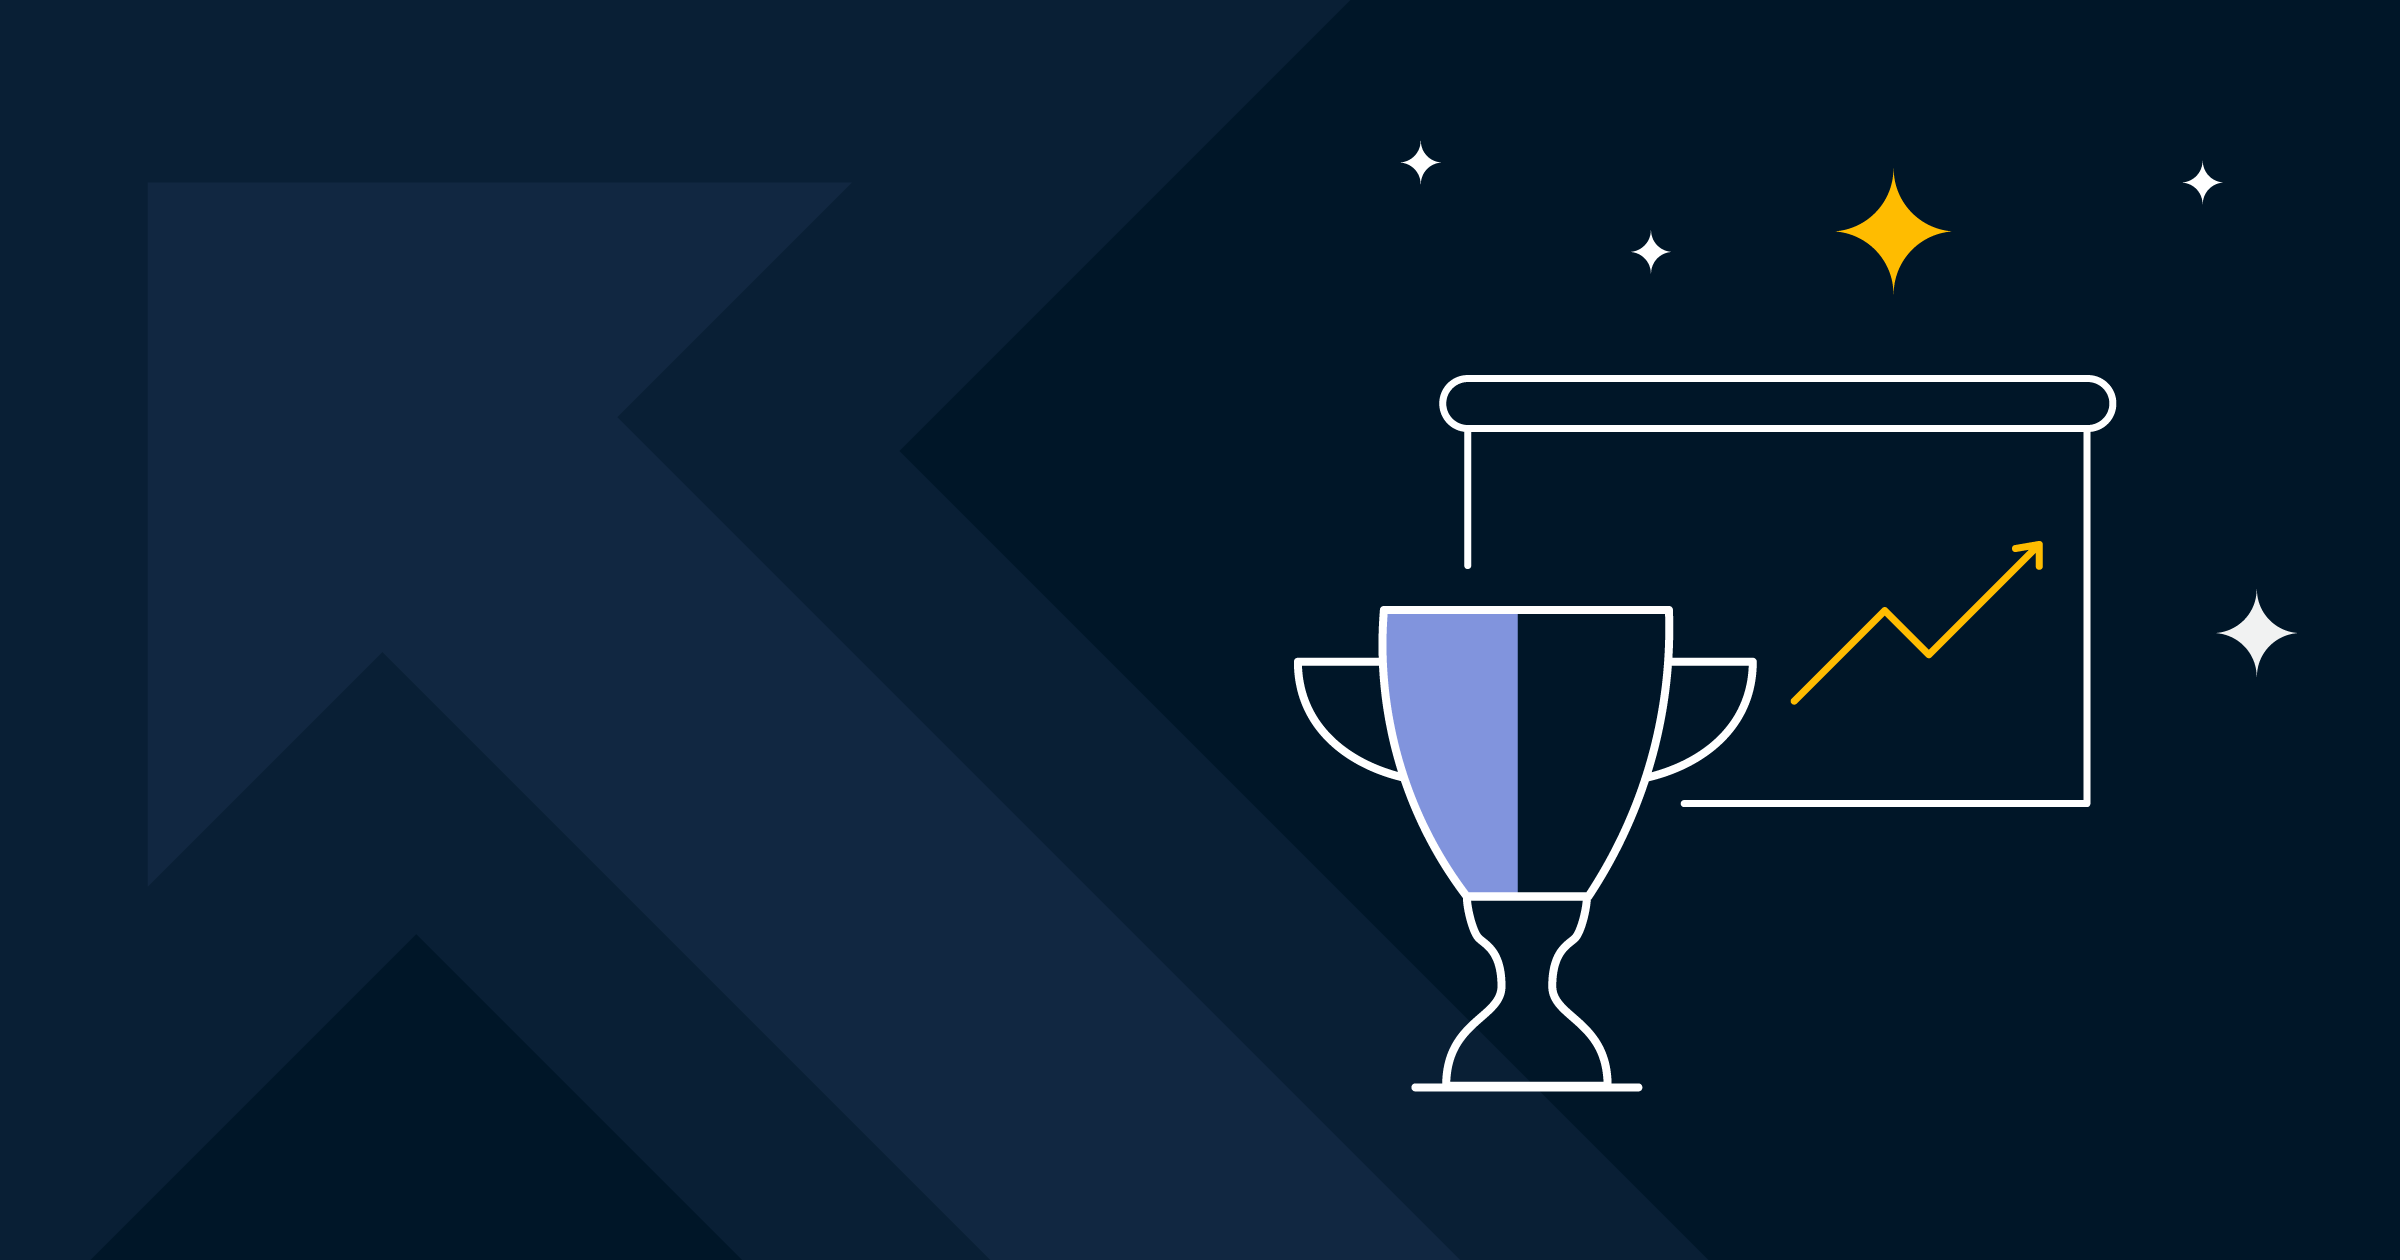 Graphic illustration featuring a trophy and a rising graph, symbolizing achievement or success.